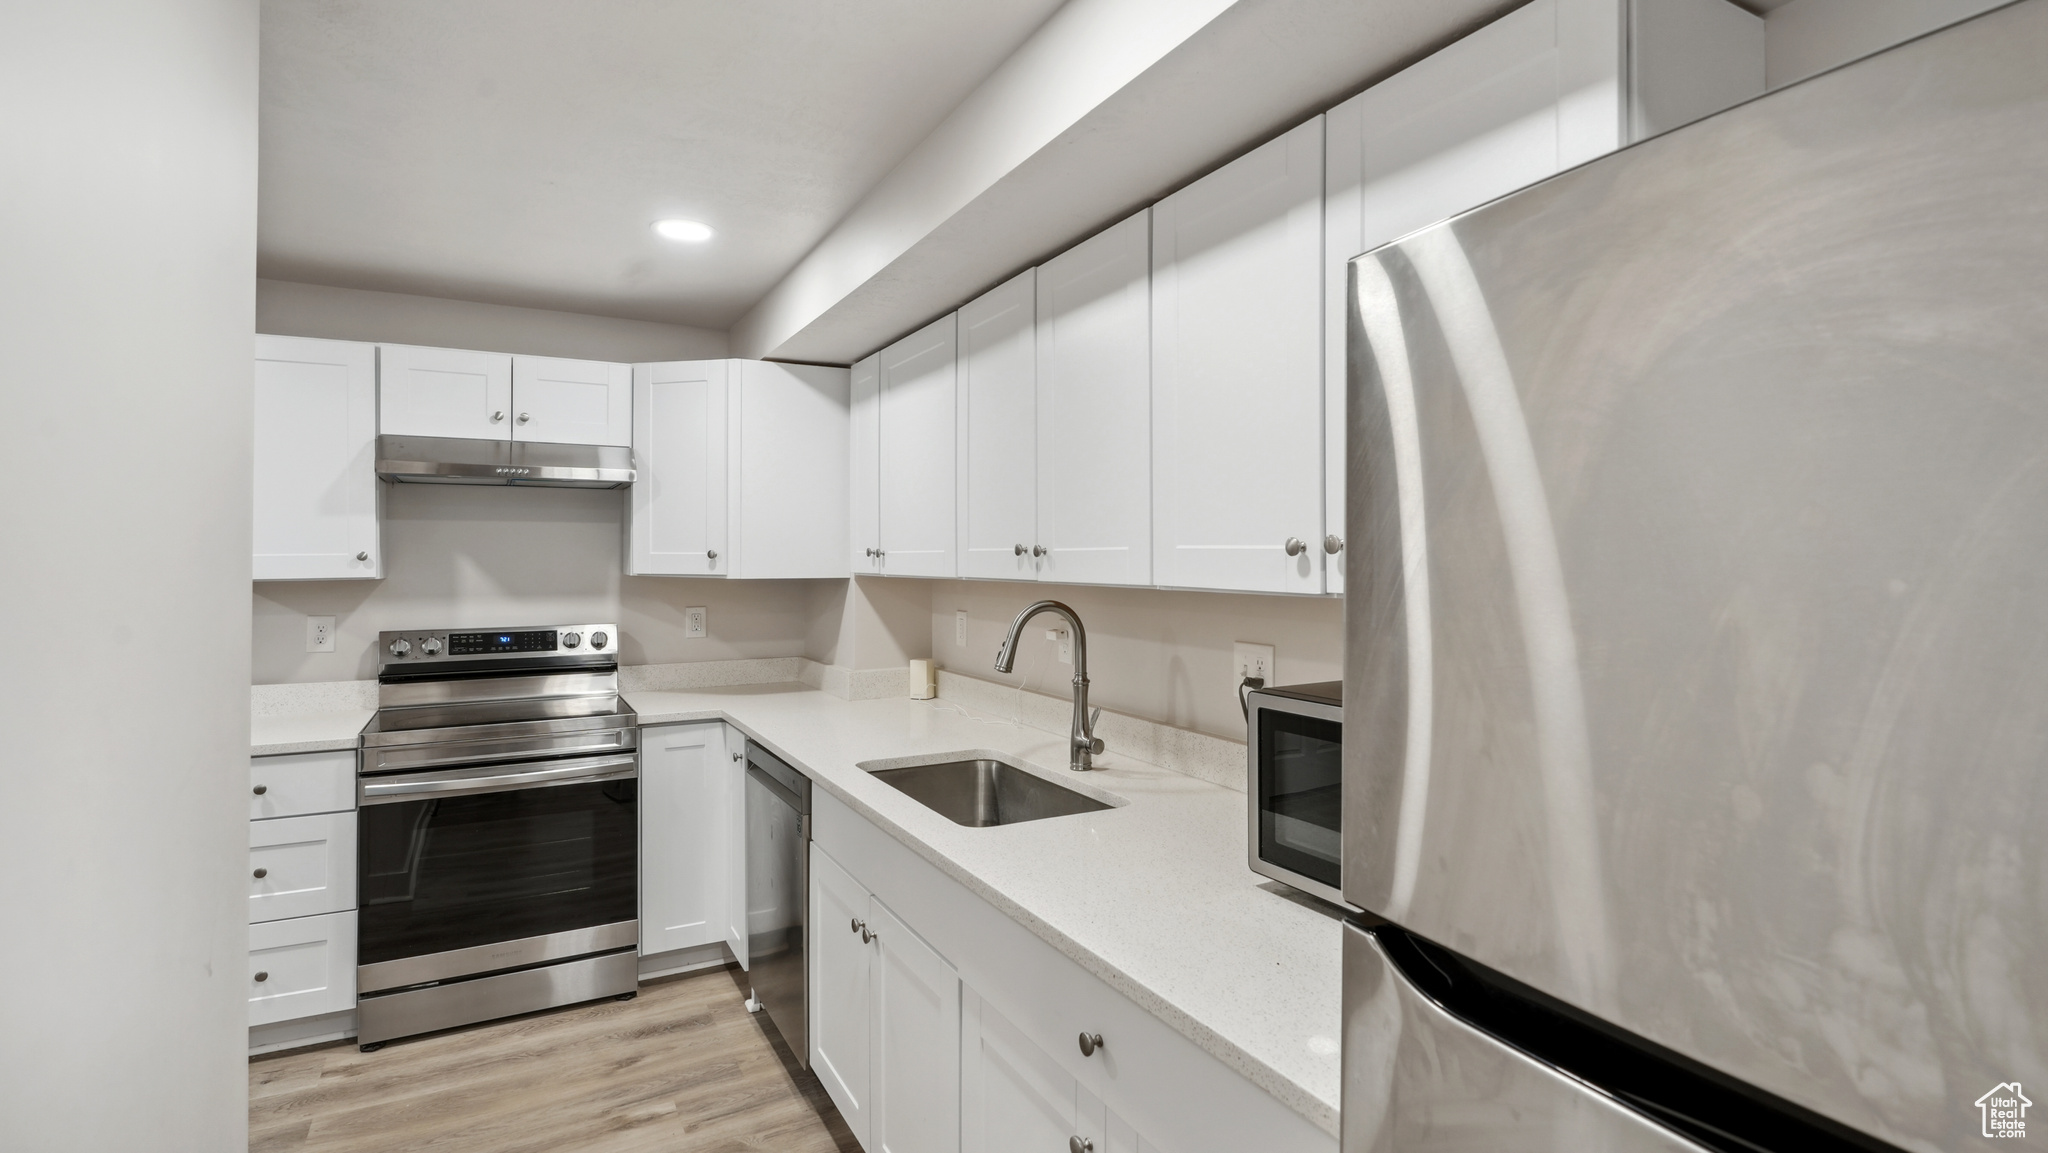 Kitchen featuring white cabinets, light hardwood / wood-style flooring, appliances with stainless steel finishes, sink, and light stone counters